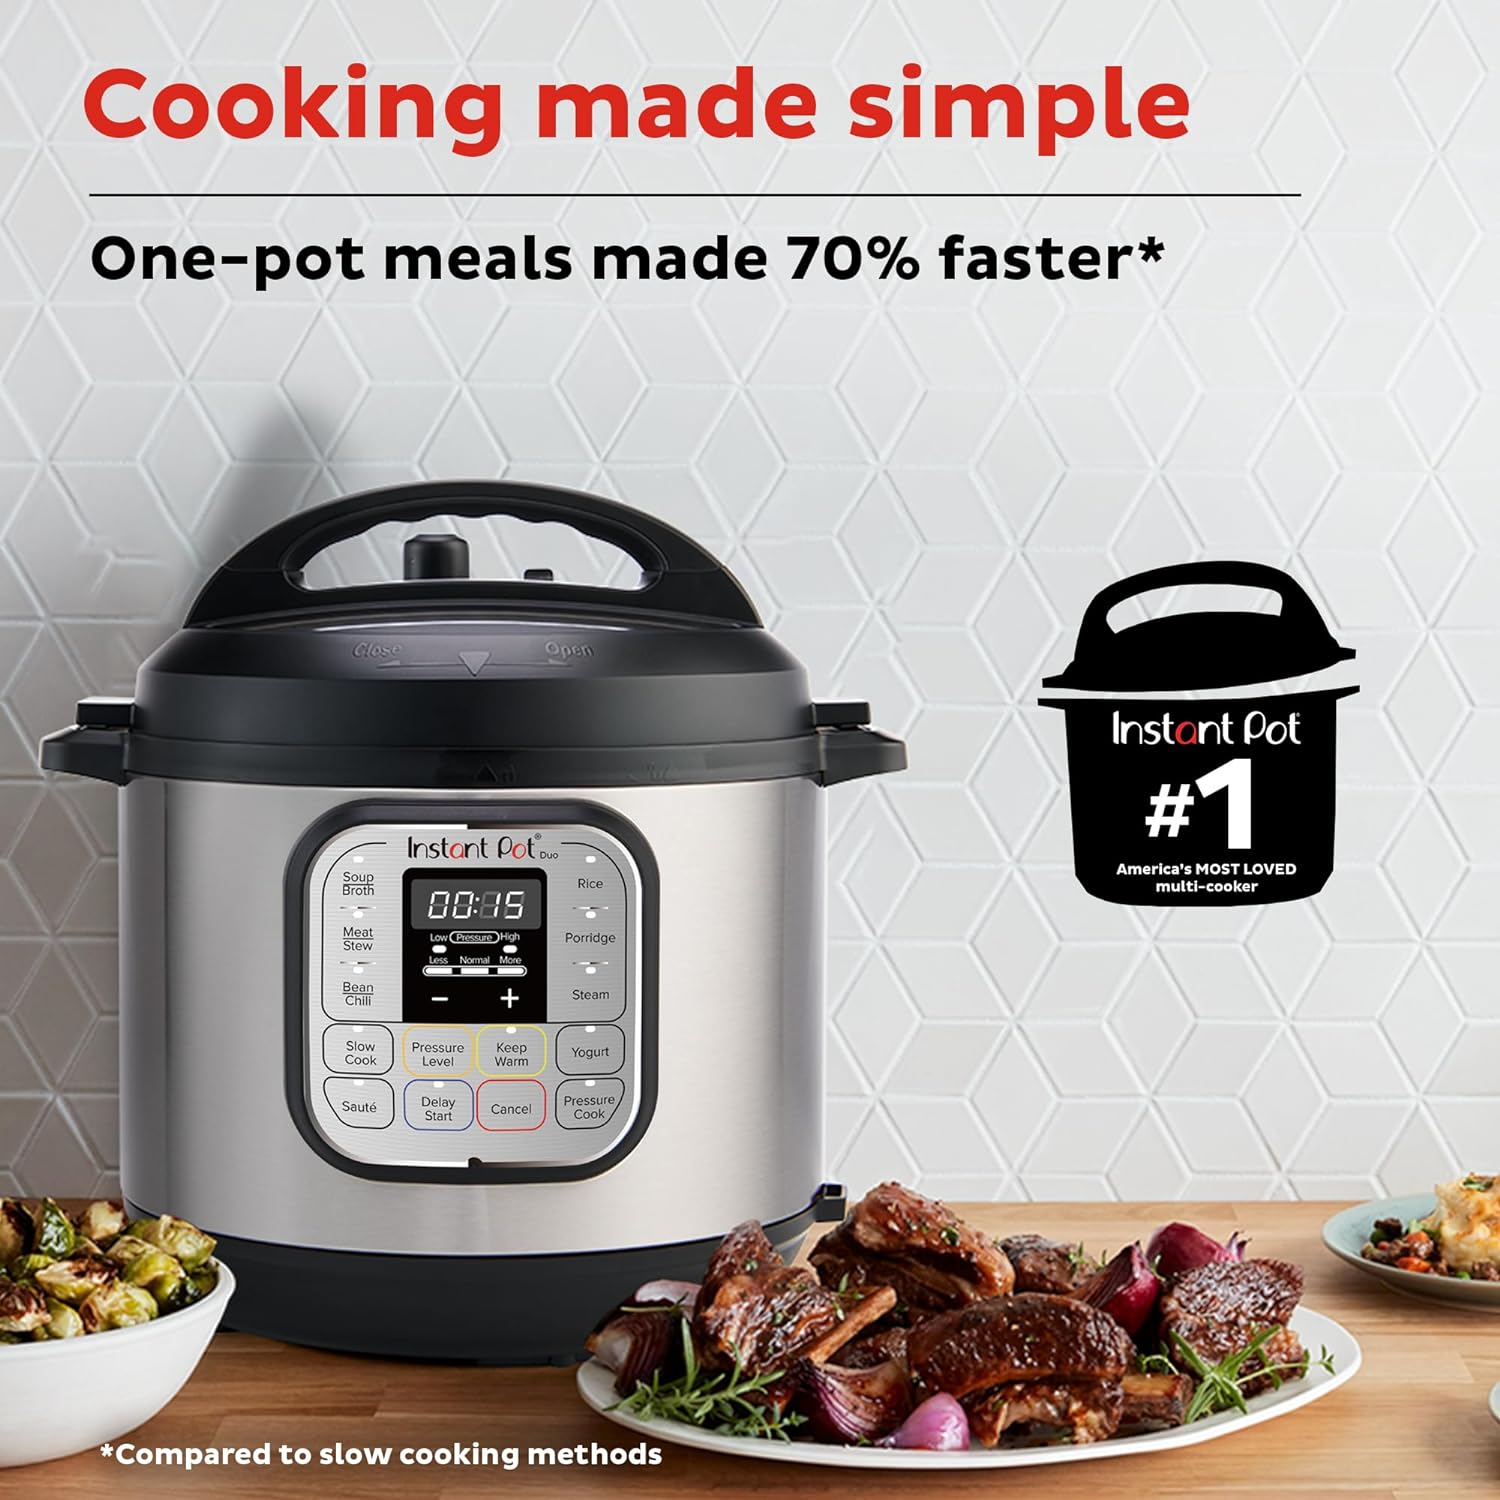 Instant Pot Duo 7-in-1 Electric Pressure Cooker, Slow Cooker, Rice Cooker, Steamer, Sauté, Yogurt Maker, Warmer & Sterilizer, Includes Free App with over 1900 Recipes, Stainless Steel, 3 Quart - image 4 of 9